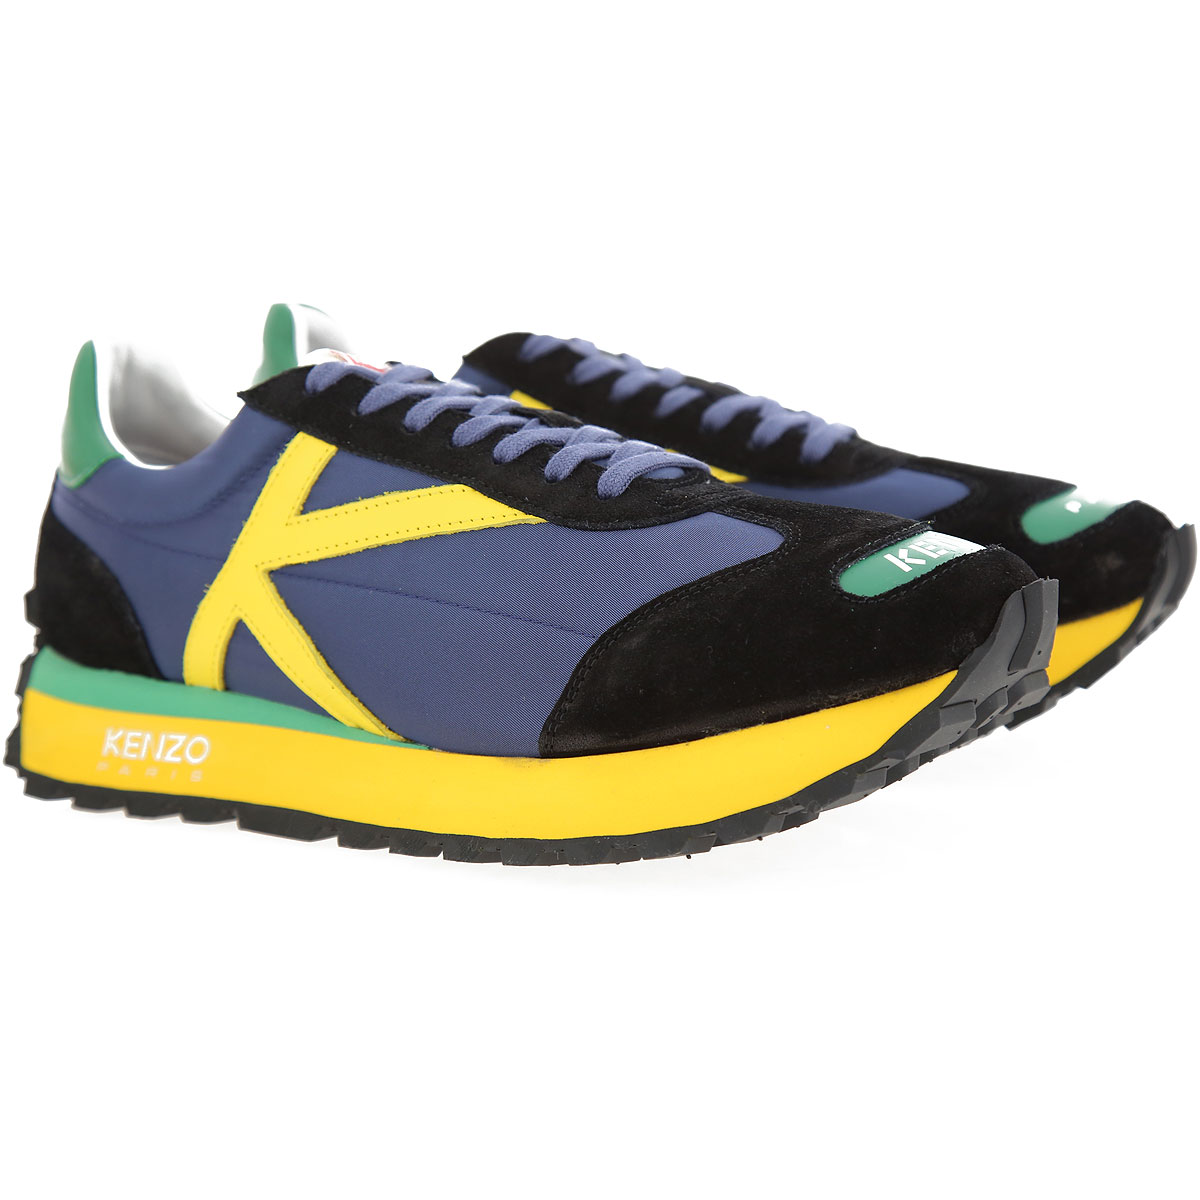 Mens Shoes Kenzo, Style code: fd55sn050f54-77-